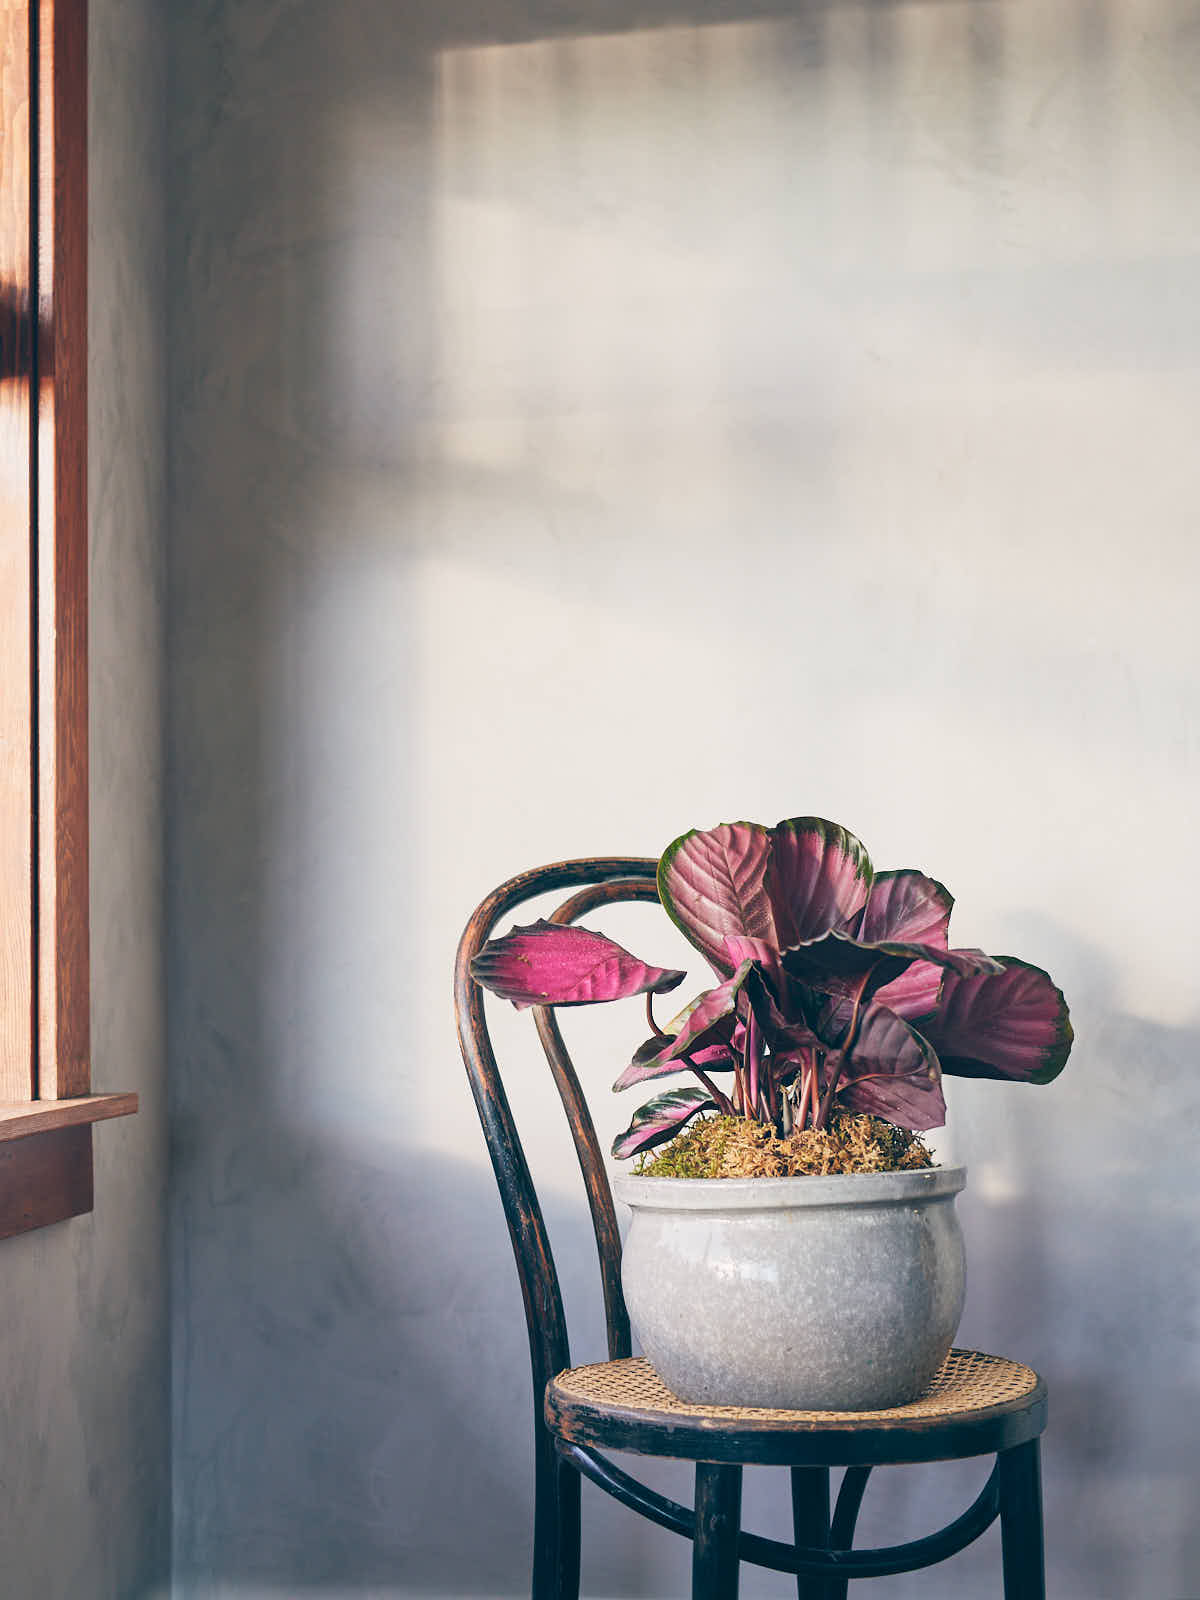 Rose Painted (Rosy) Calathea (Calathea roseopicta) in a light grey ceramic planter sitting on a bentwood chair in front of grey plaster wall